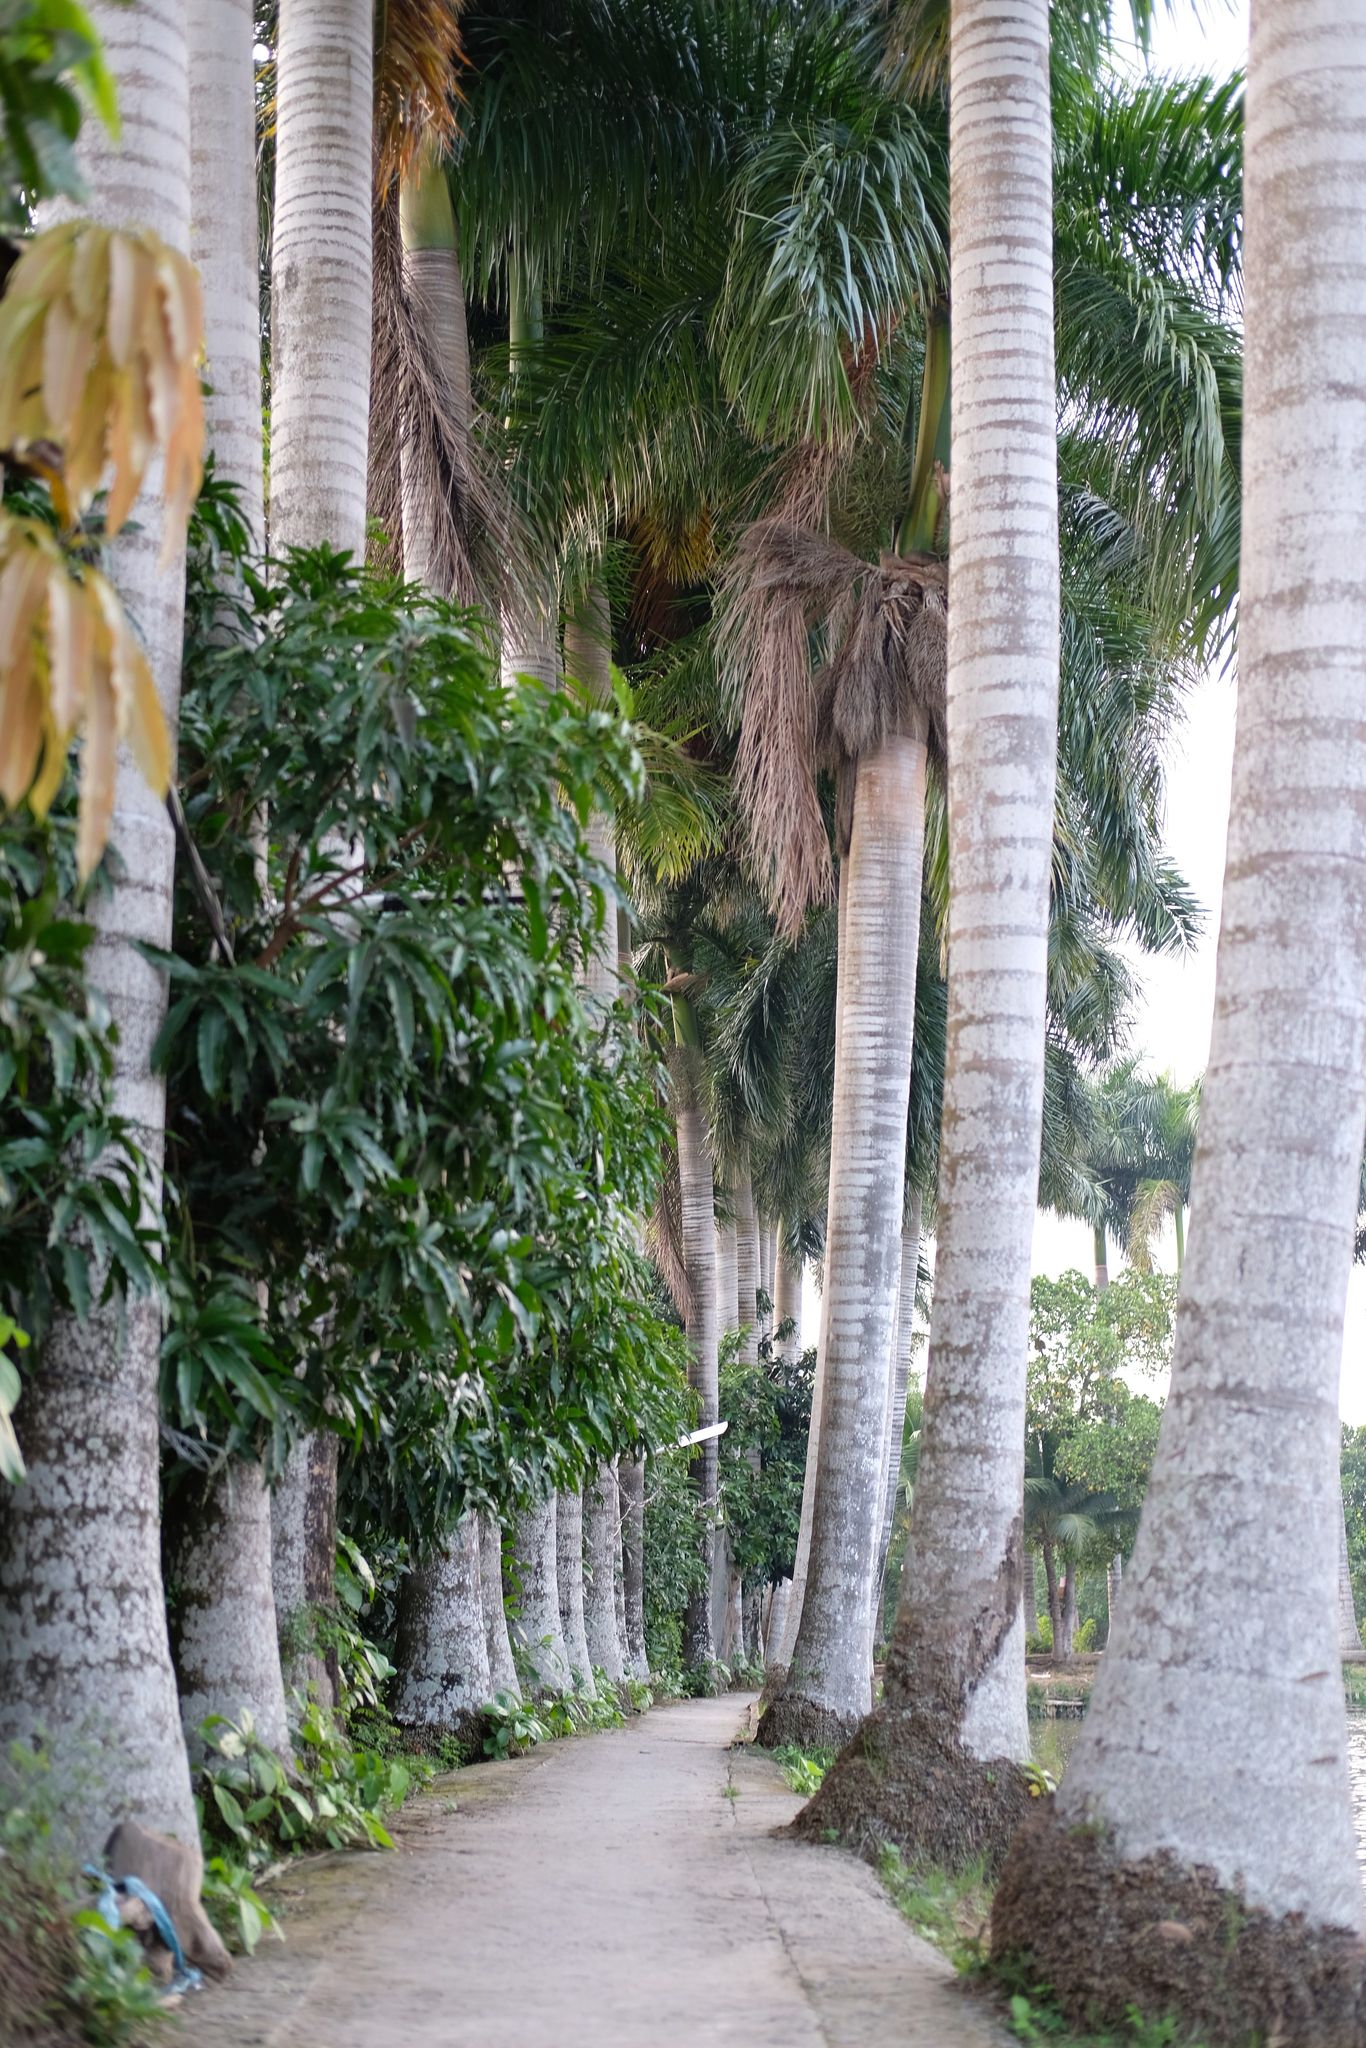 Big areca trees line a road on Son Islet in Can Tho City, Vietnam. Photo: Tran Phuong / Tuoi Tre News